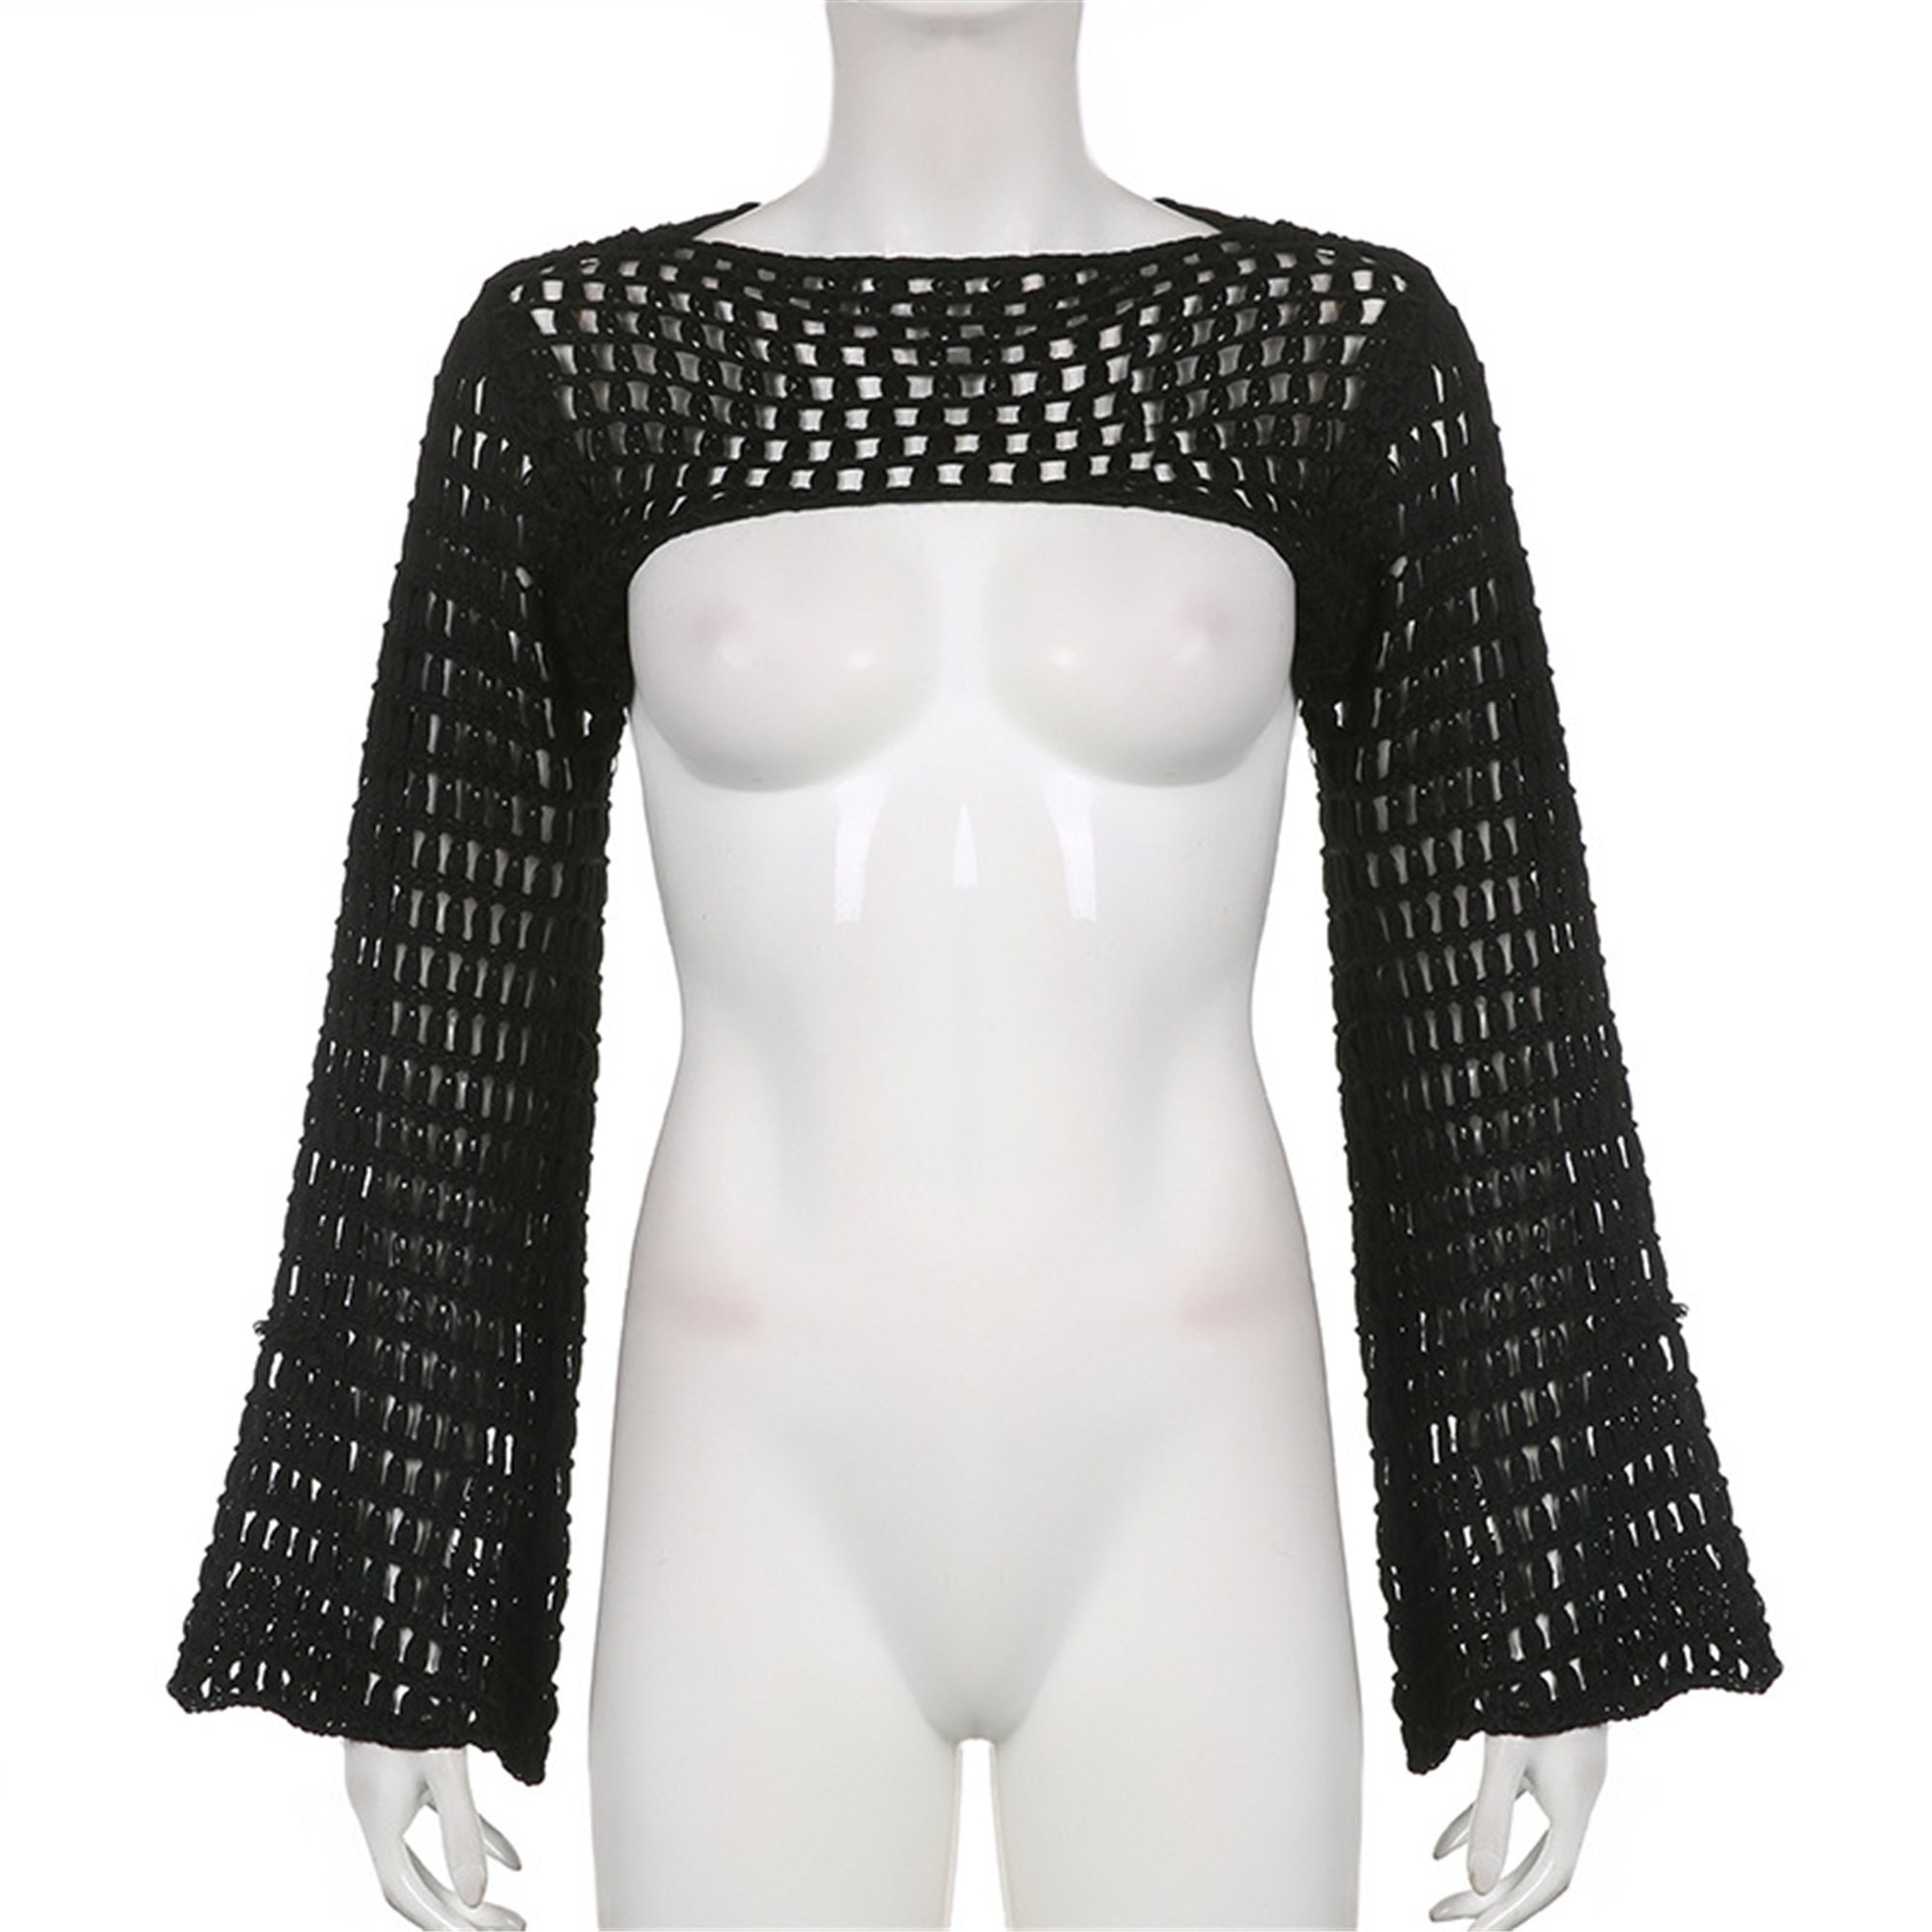 Sexy Flared Sleeve Cutout Perspective Round Neck Long Sleeve Top Aesthetic Long Sleeve Crop Top Y2k Black Hollow Out Crochet Top Clothing